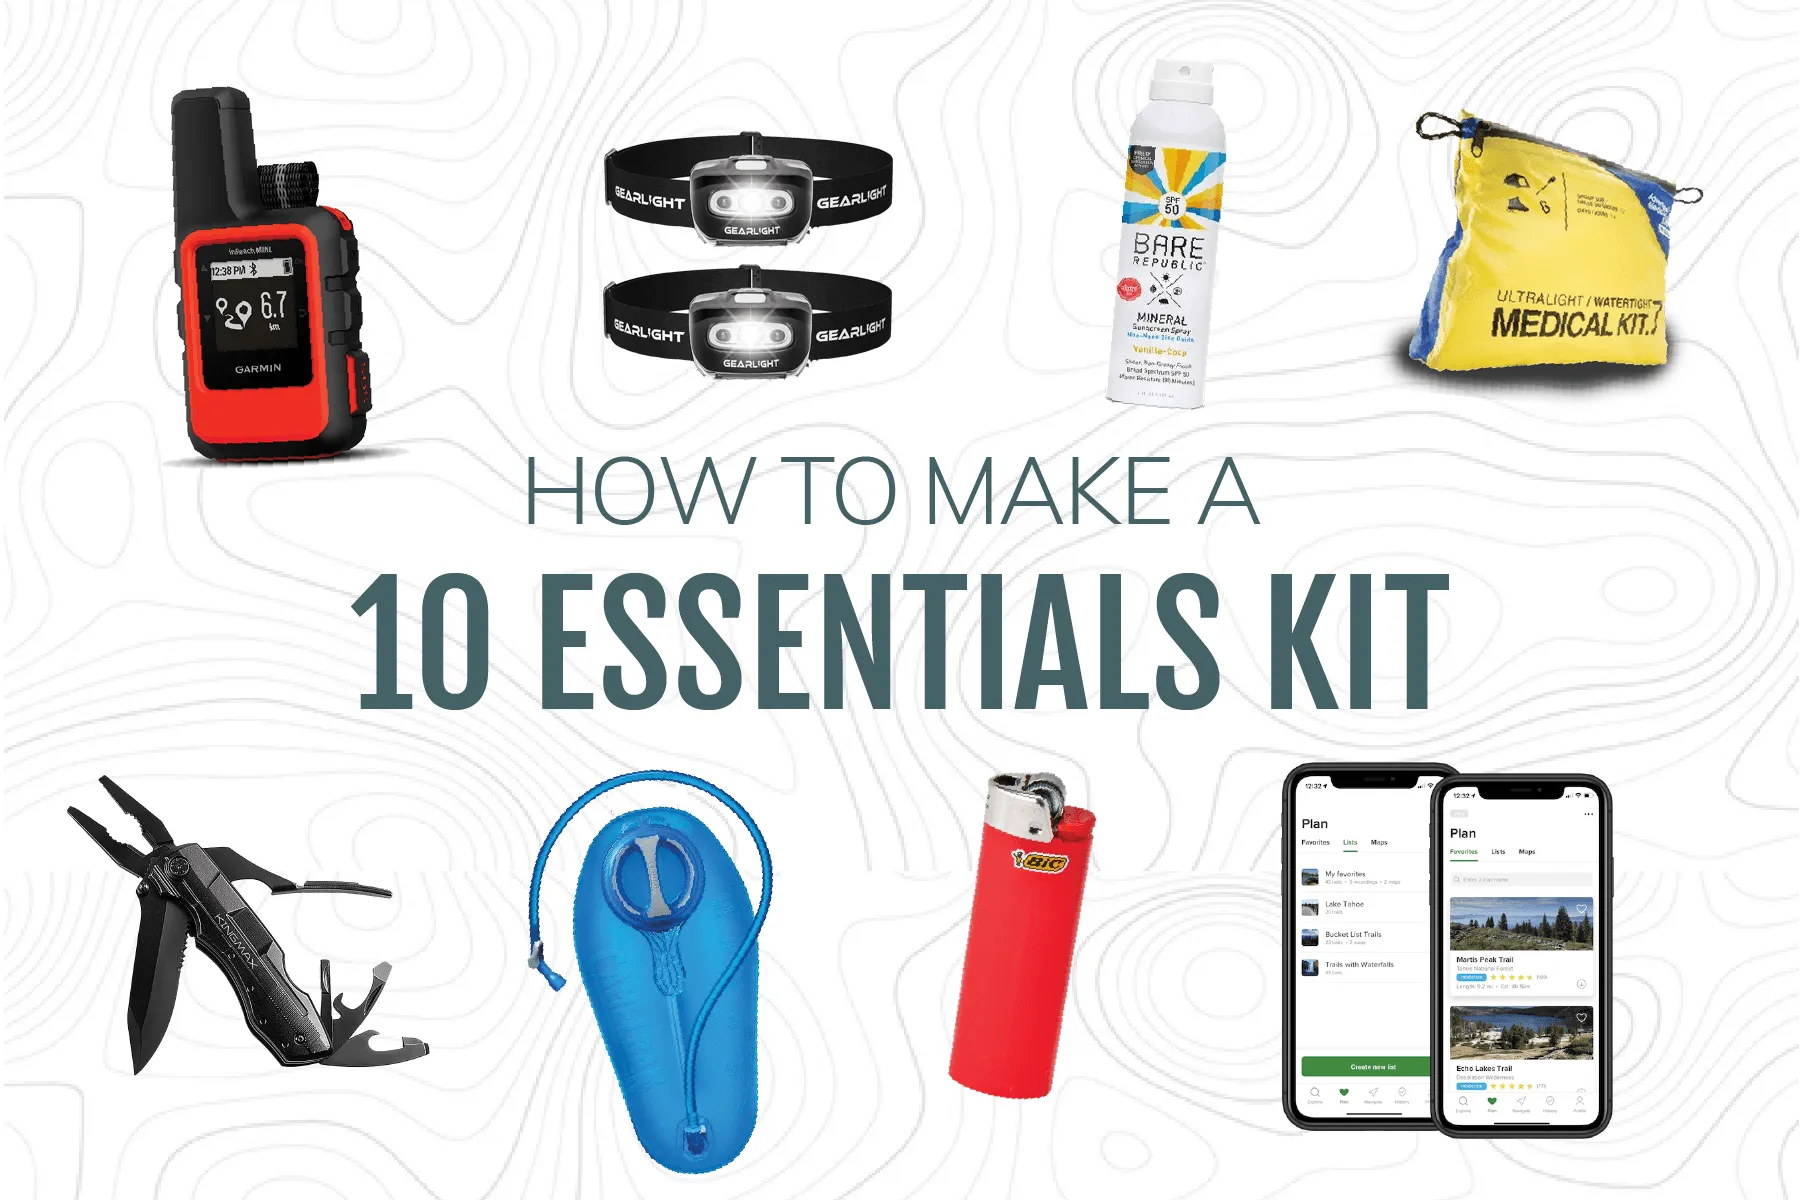 How to make a 10 essentials kit | Hiking gear | What to take hiking | Hiking safety